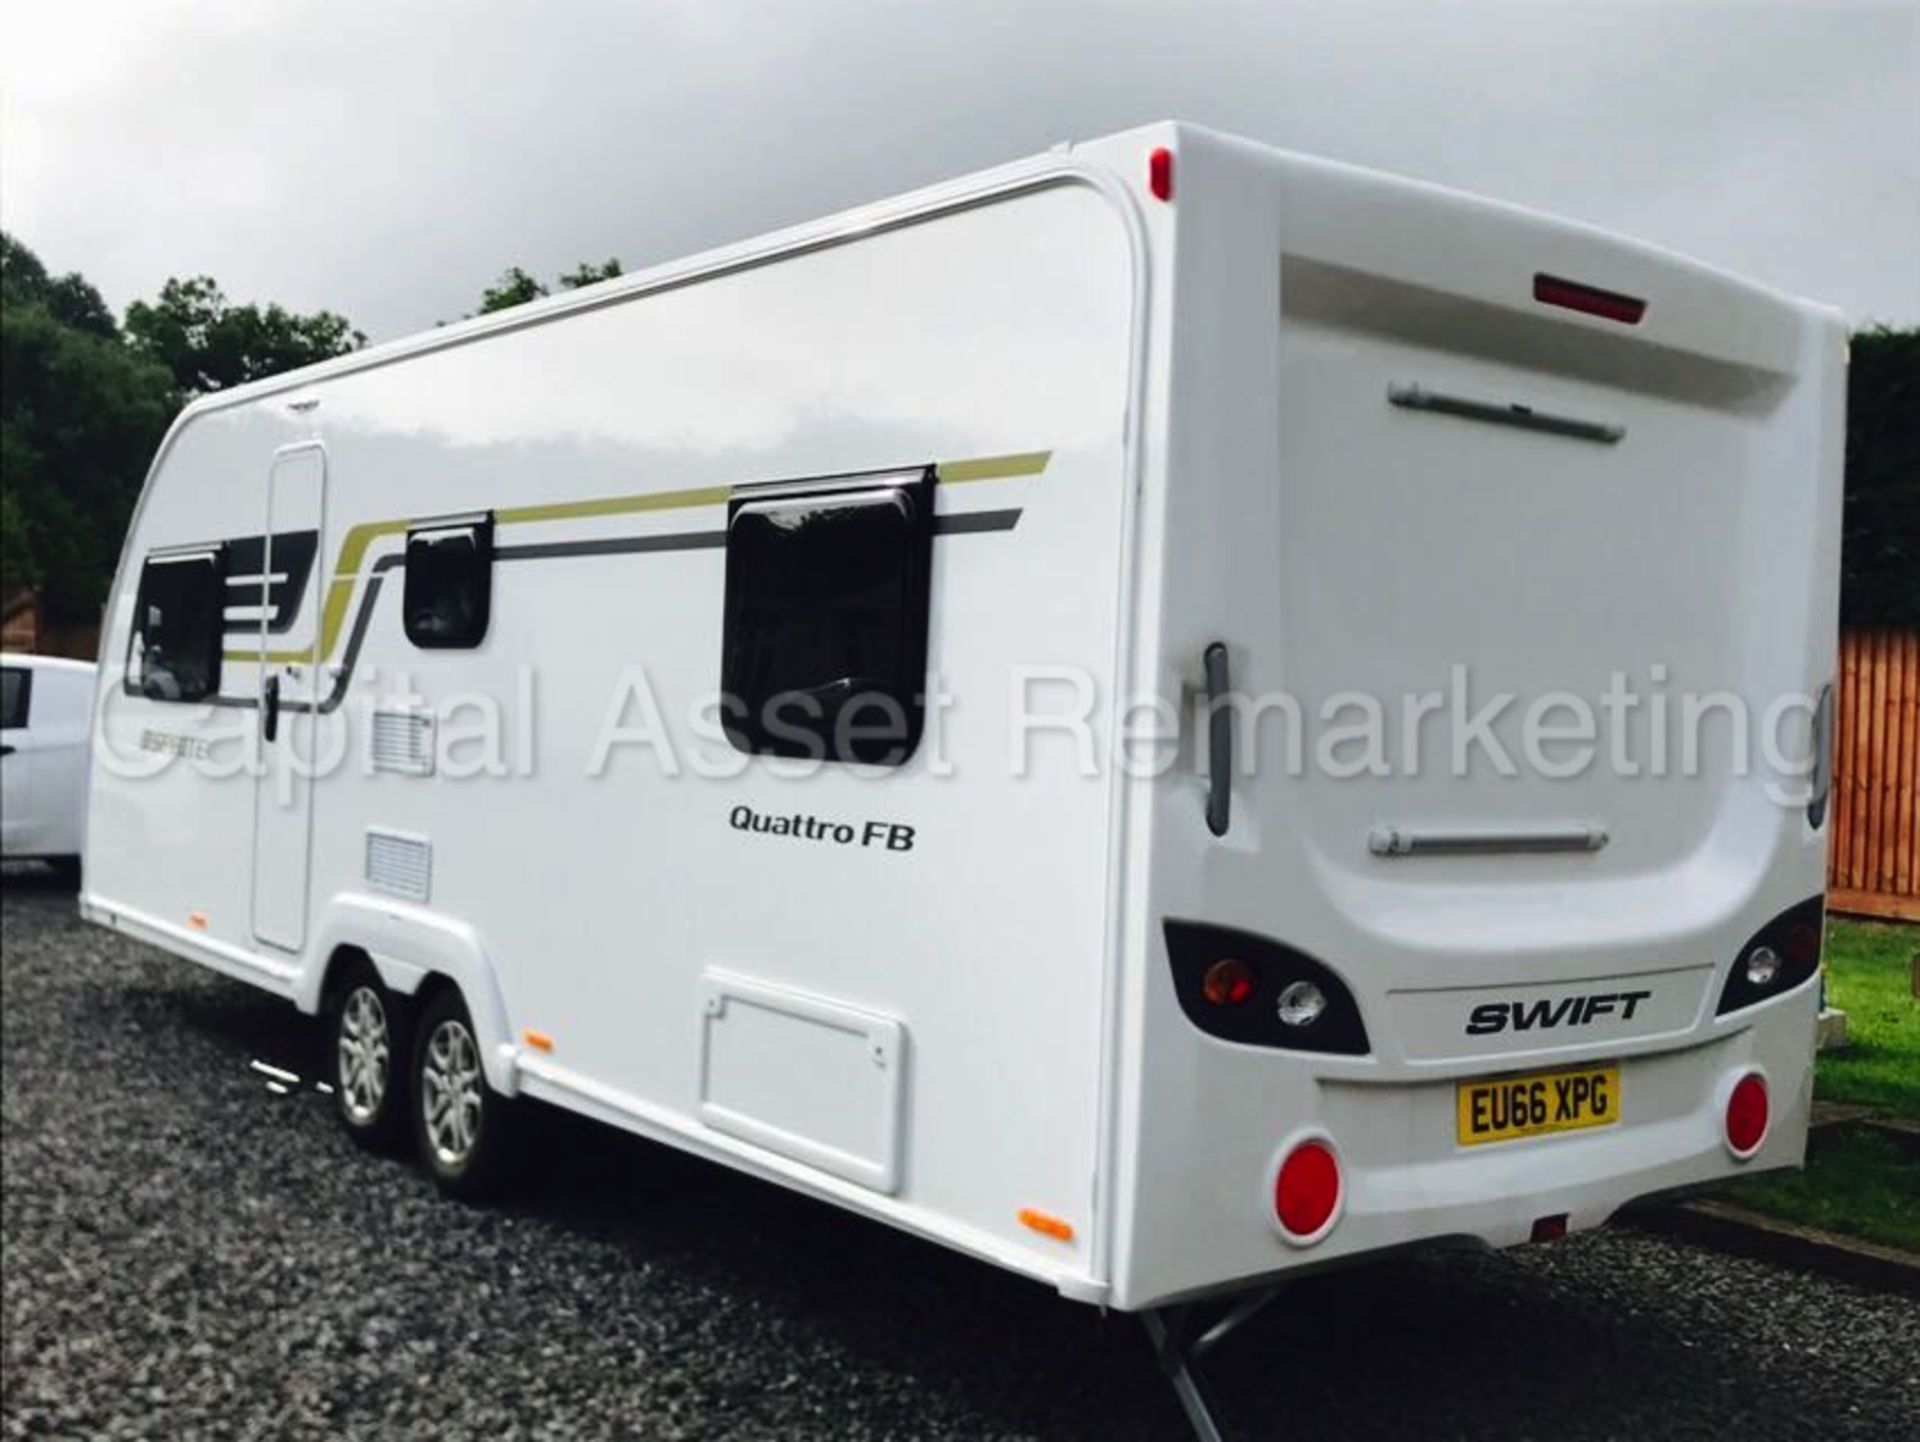 (On sale) 2017 - 'SWIFT - SPRITE QUATTRO FB' TOURING CARAVAN (1 OWNER FROM NEW) **CRIS REGISTERED** - Image 3 of 31